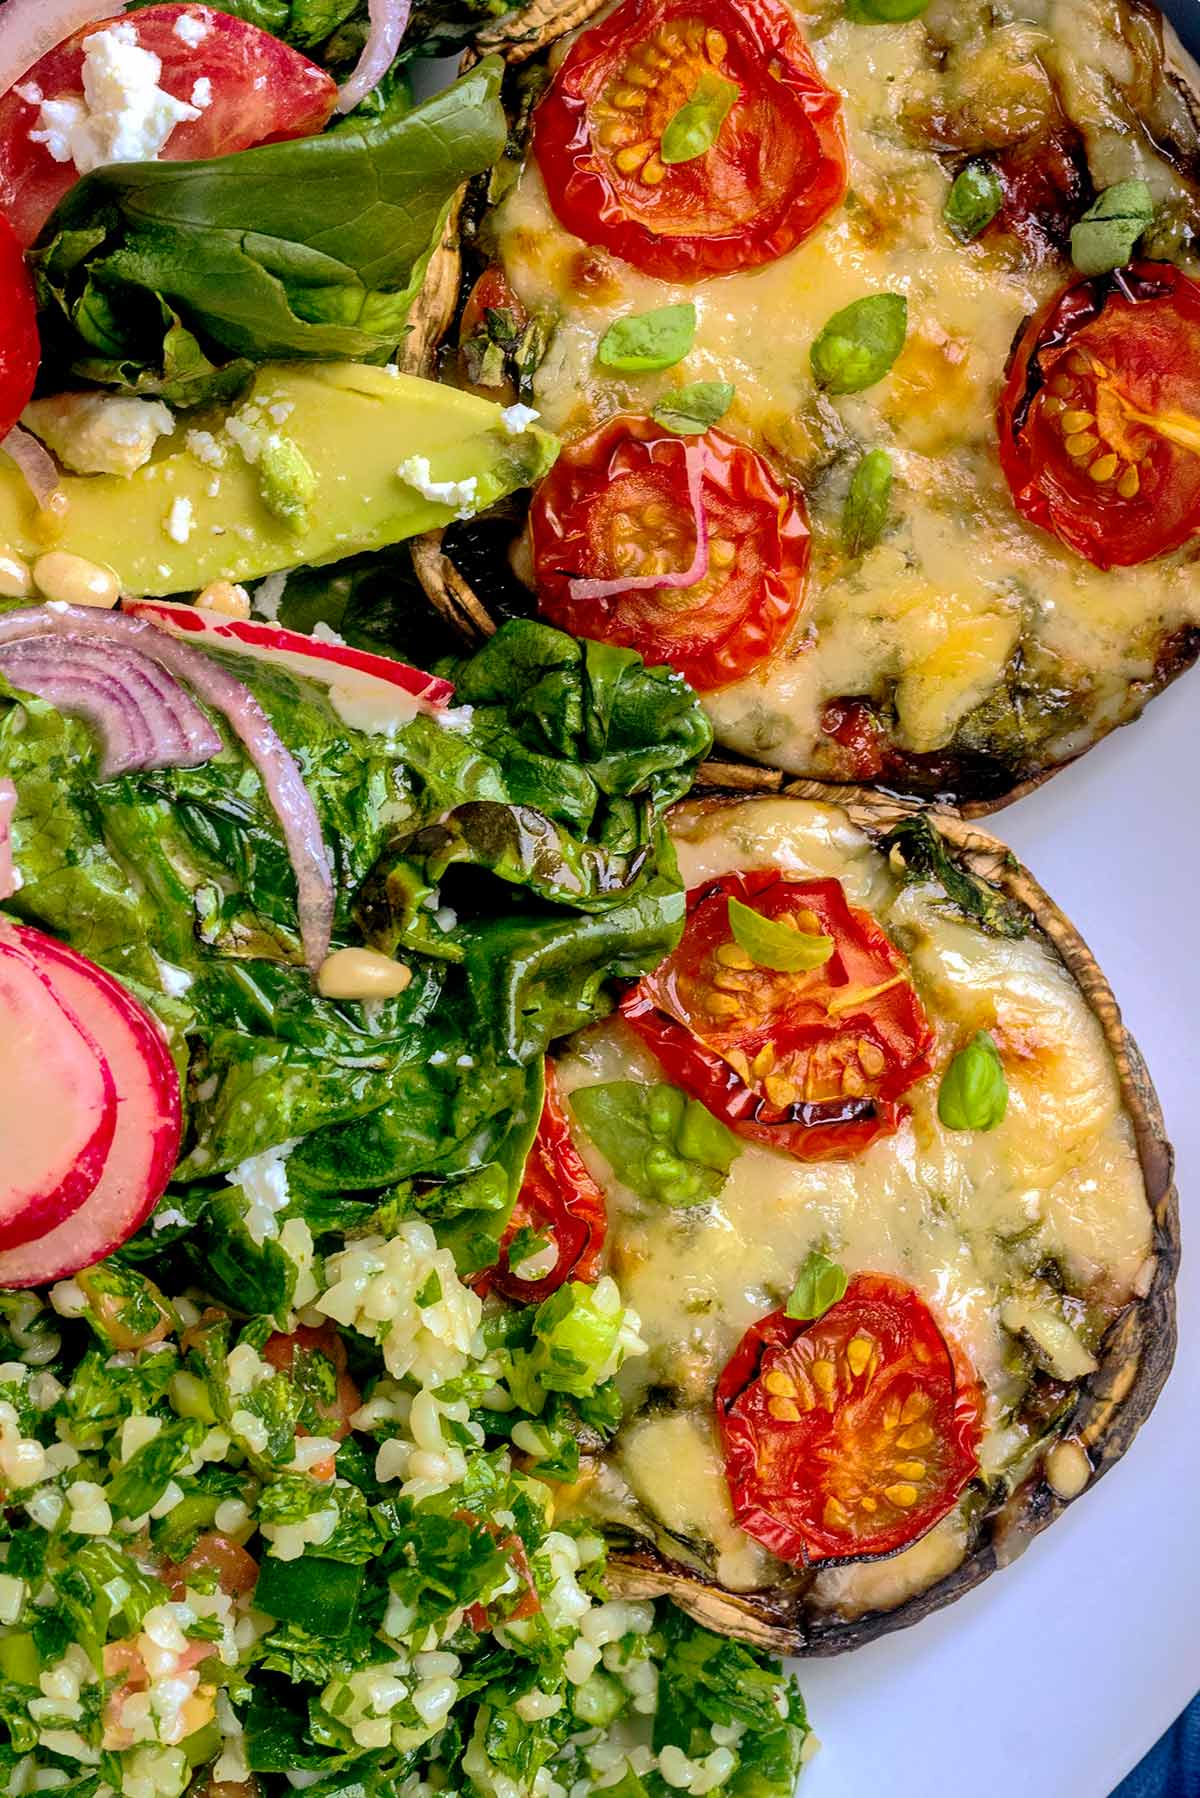 Two mushroom pizzas on a plate with some tabbouleh salad.